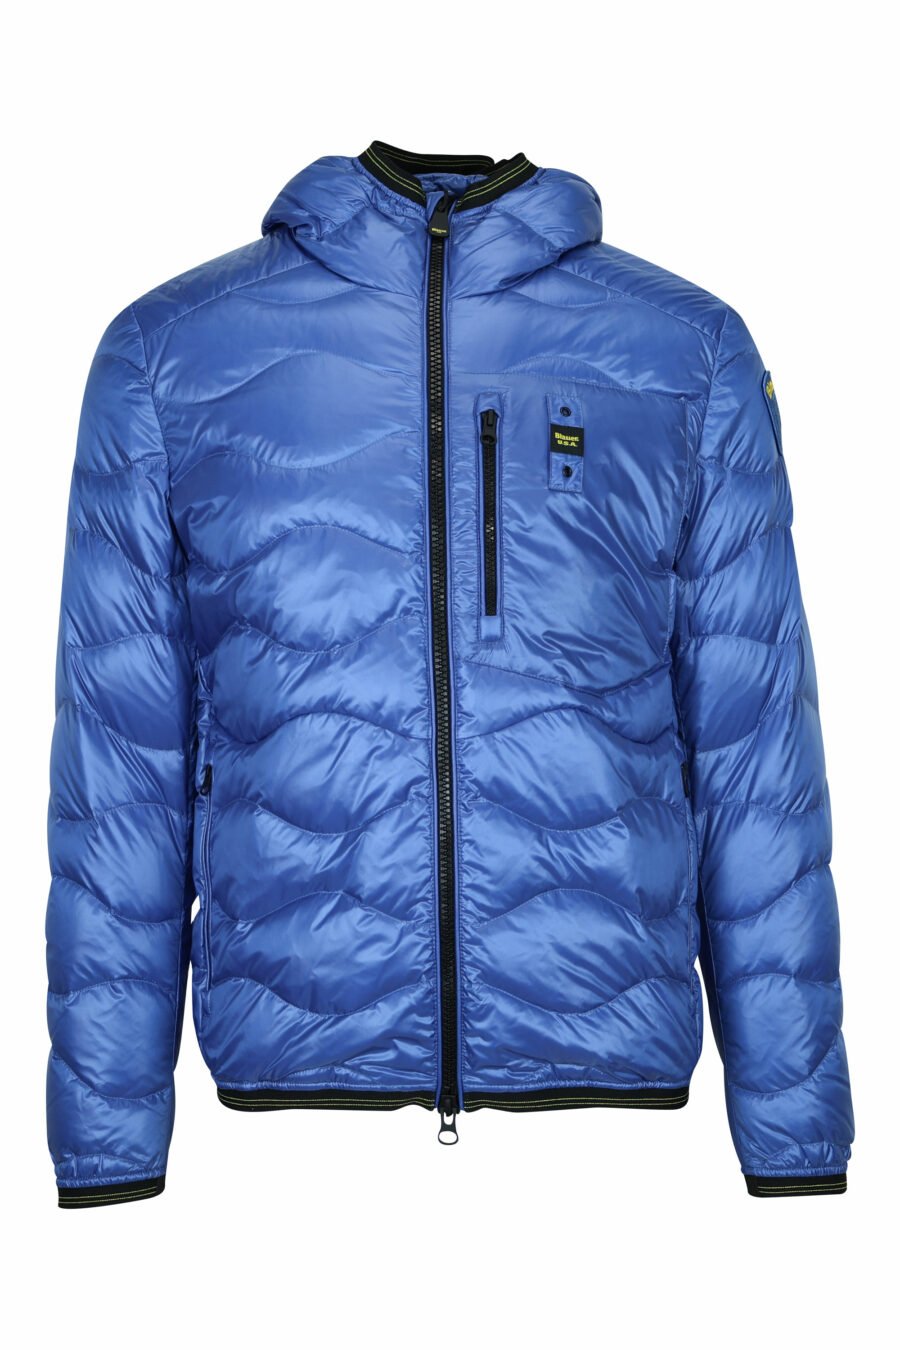 Blue jacket with diagonal lines and hood - 8058610797508